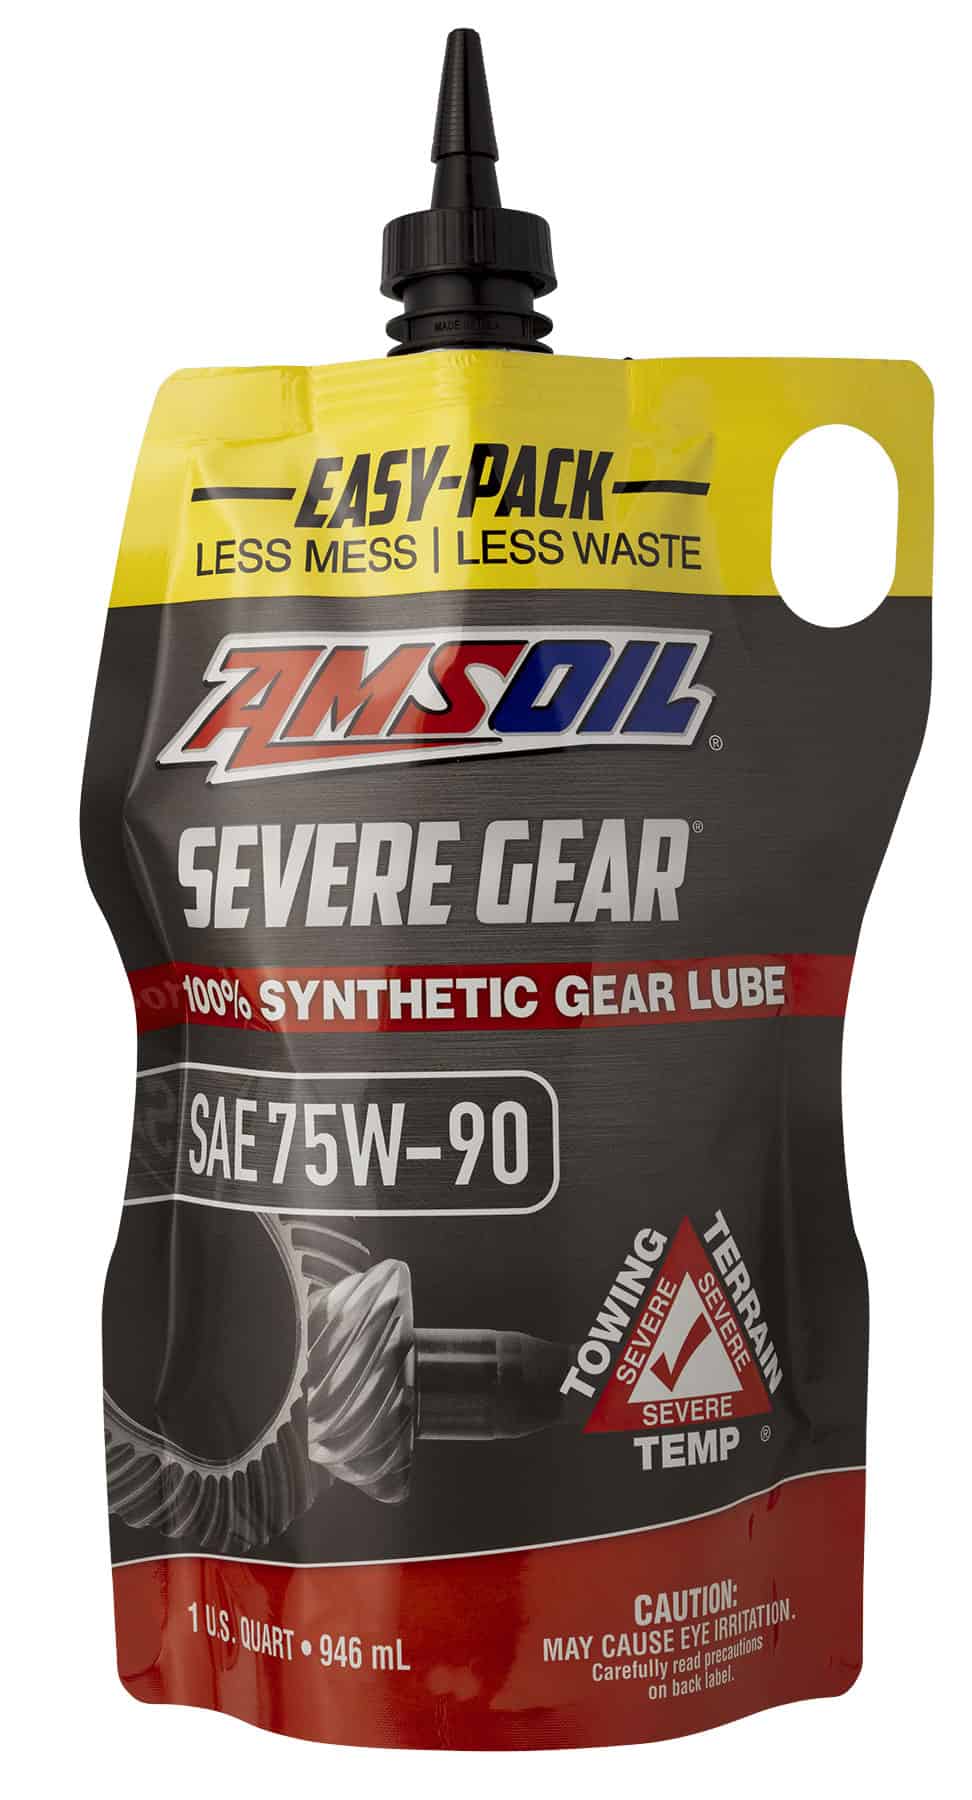 A sachet (easy-pack) of AMSOIL SEVERE GEAR® Synthetic Extreme-Pressure Gear Lube - a premium-grade gear oil engineered for maximum performance in severe-duty applications.